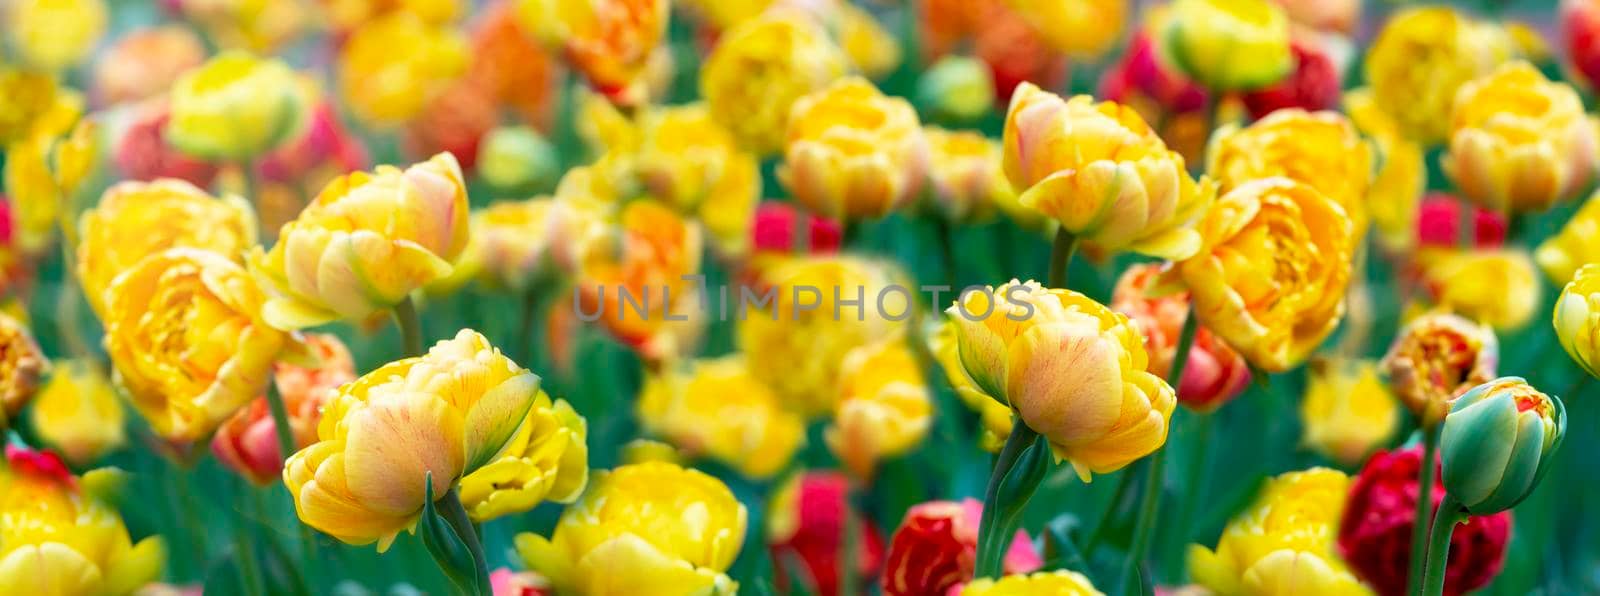 Banner tulips. Beautiful spring flowers in the garden.